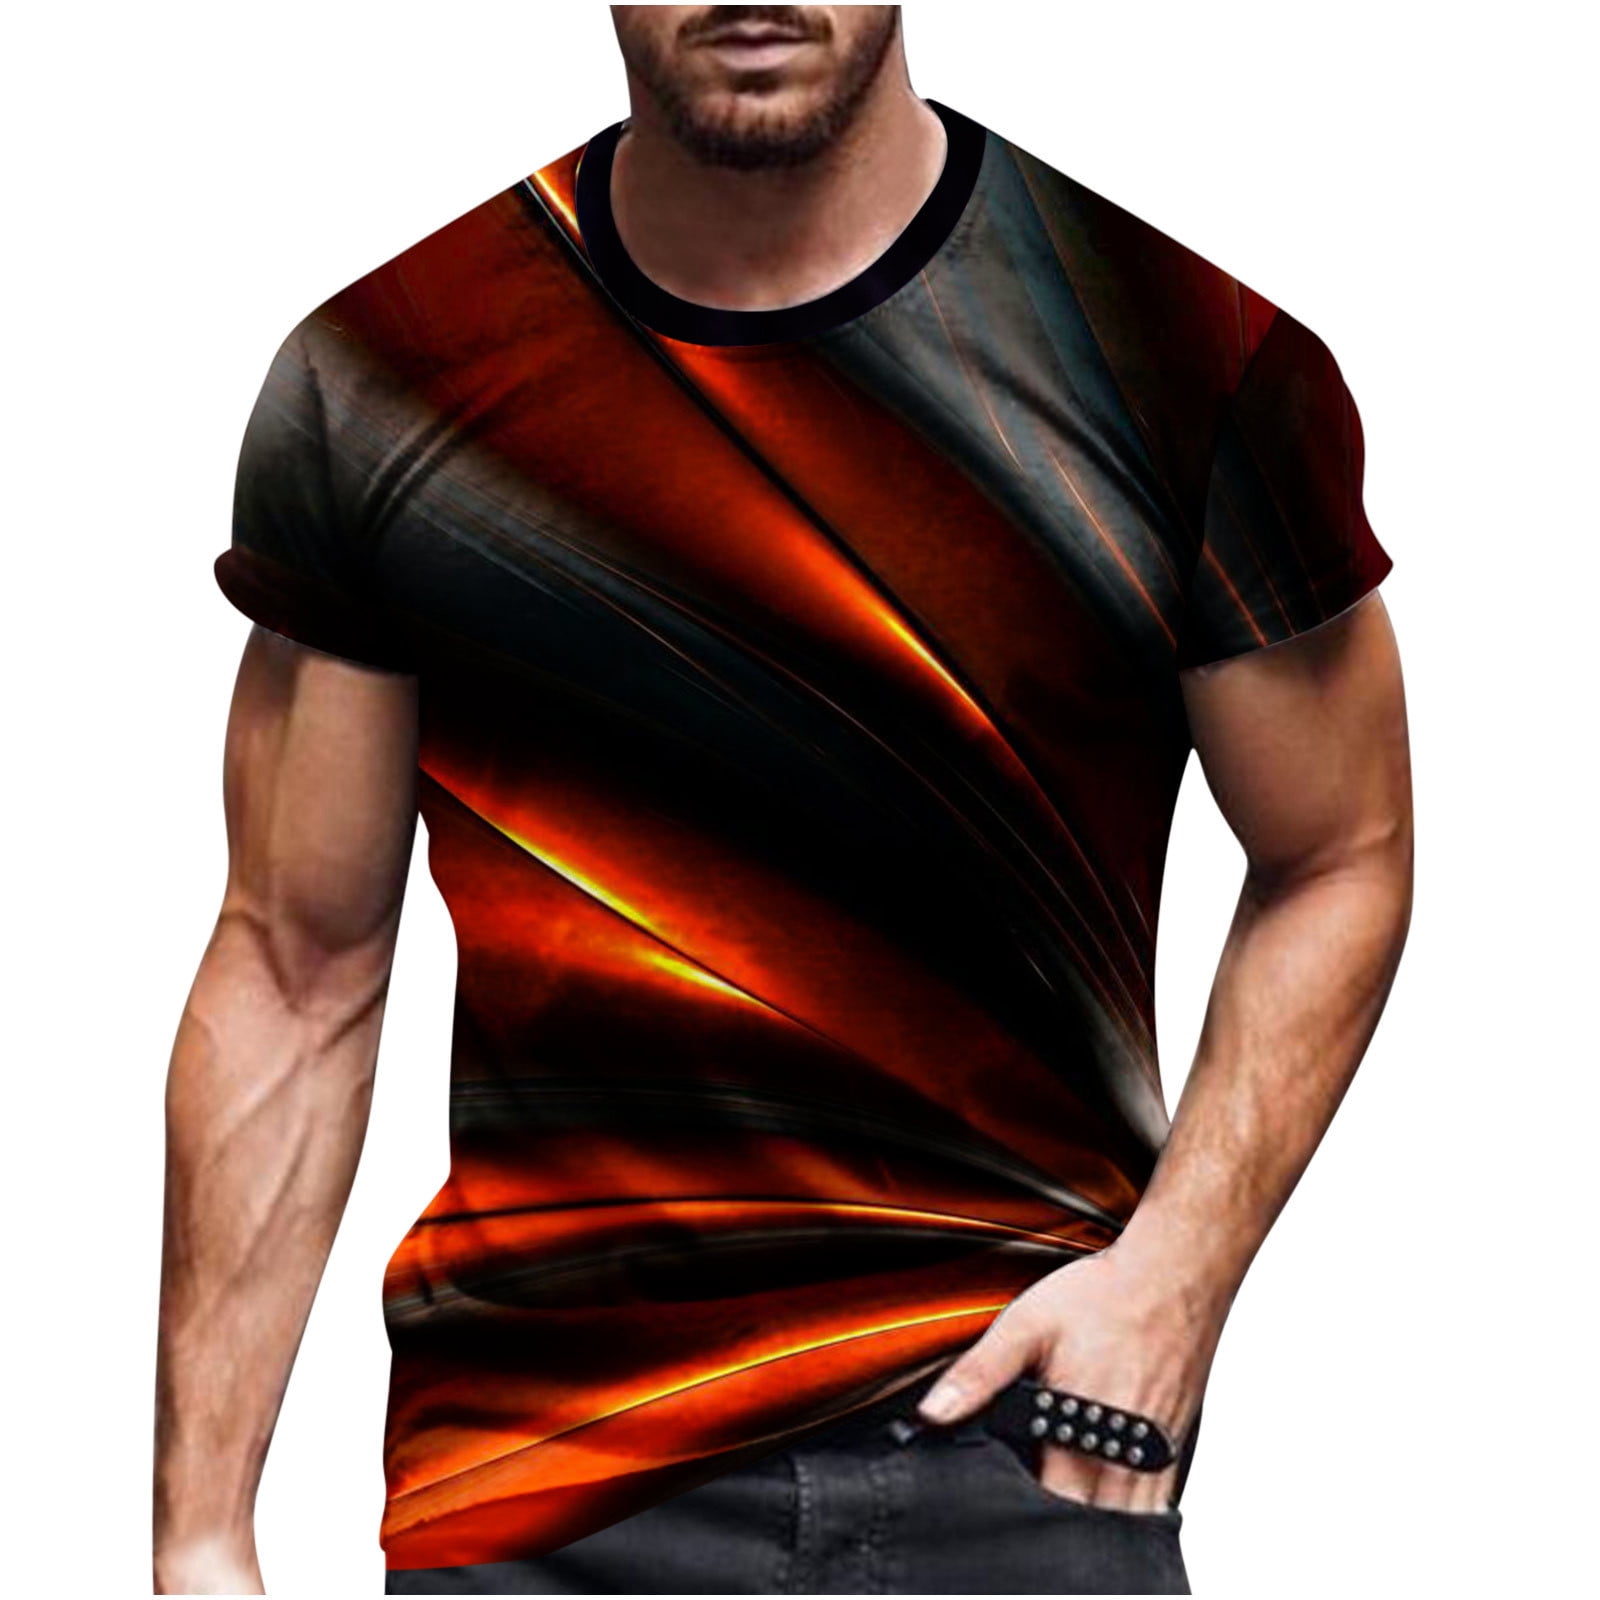 HAPIMO Round Neck Fashion Tops Men's Summer Fitness Sports Shirts 3D  Digital Graffiti Graphic Print Blouse Short Sleeve T-Shirt for Men Casual  Slim Fit Tee Clothes Red XXL 